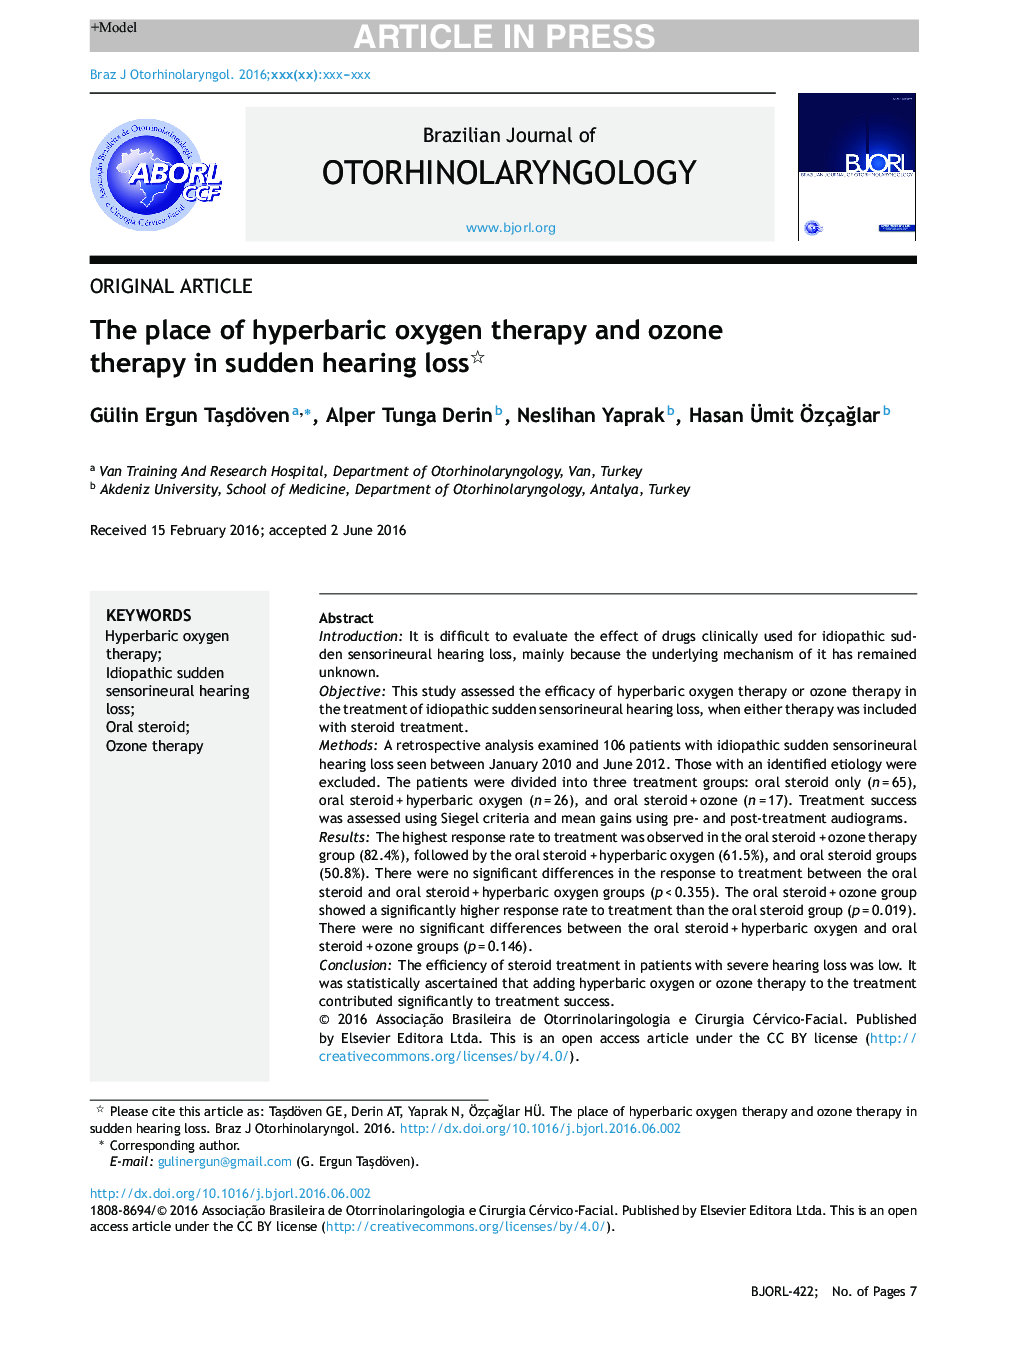 The place of hyperbaric oxygen therapy and ozone therapy in sudden hearing loss